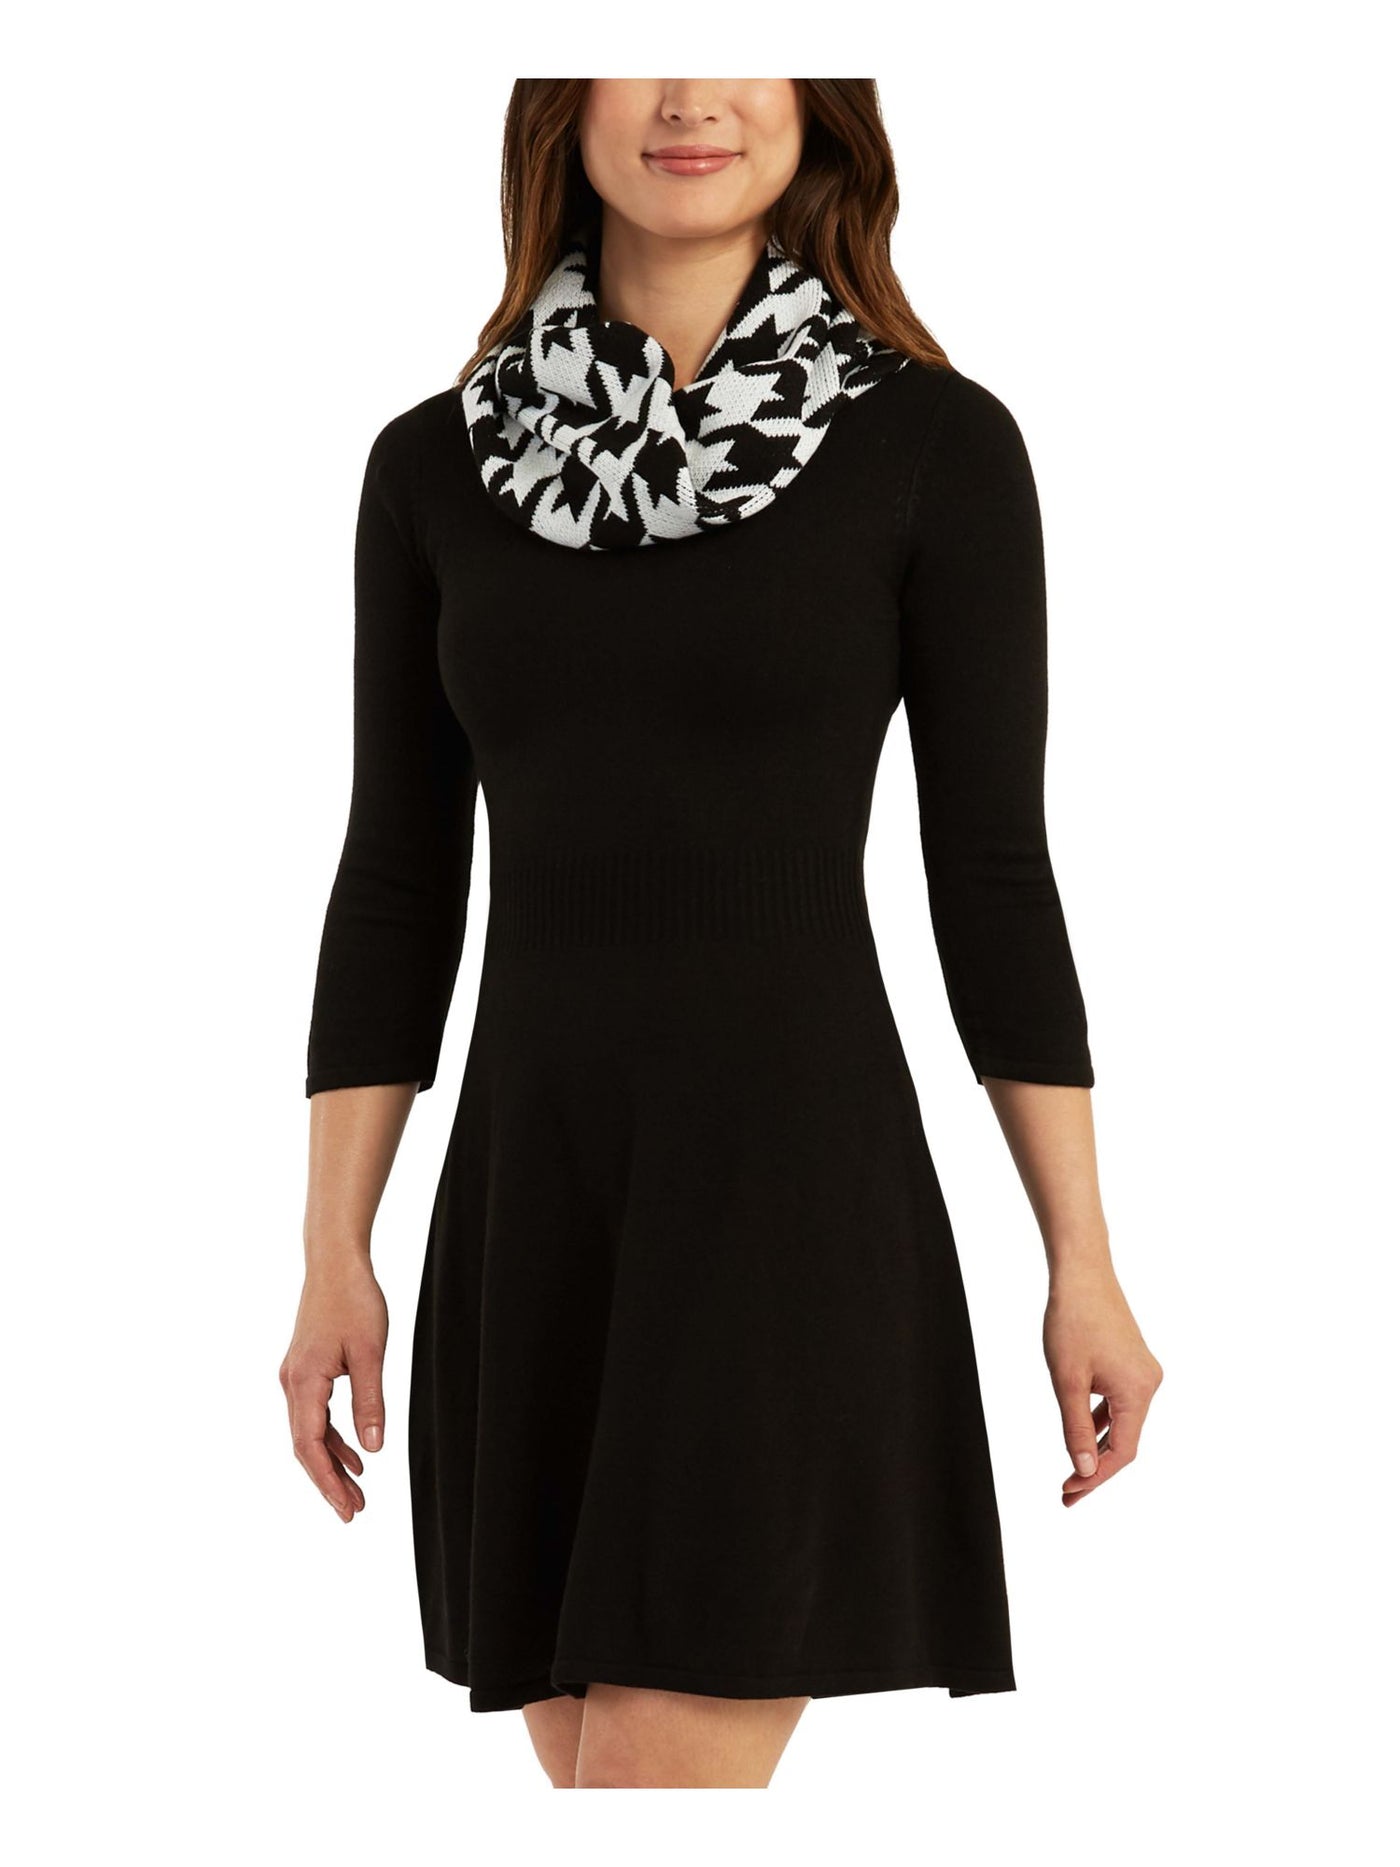 BCX DRESS Womens Black Unlined Printed Removable Scarf 3/4 Sleeve Round Neck Above The Knee Sweater Dress Juniors XS